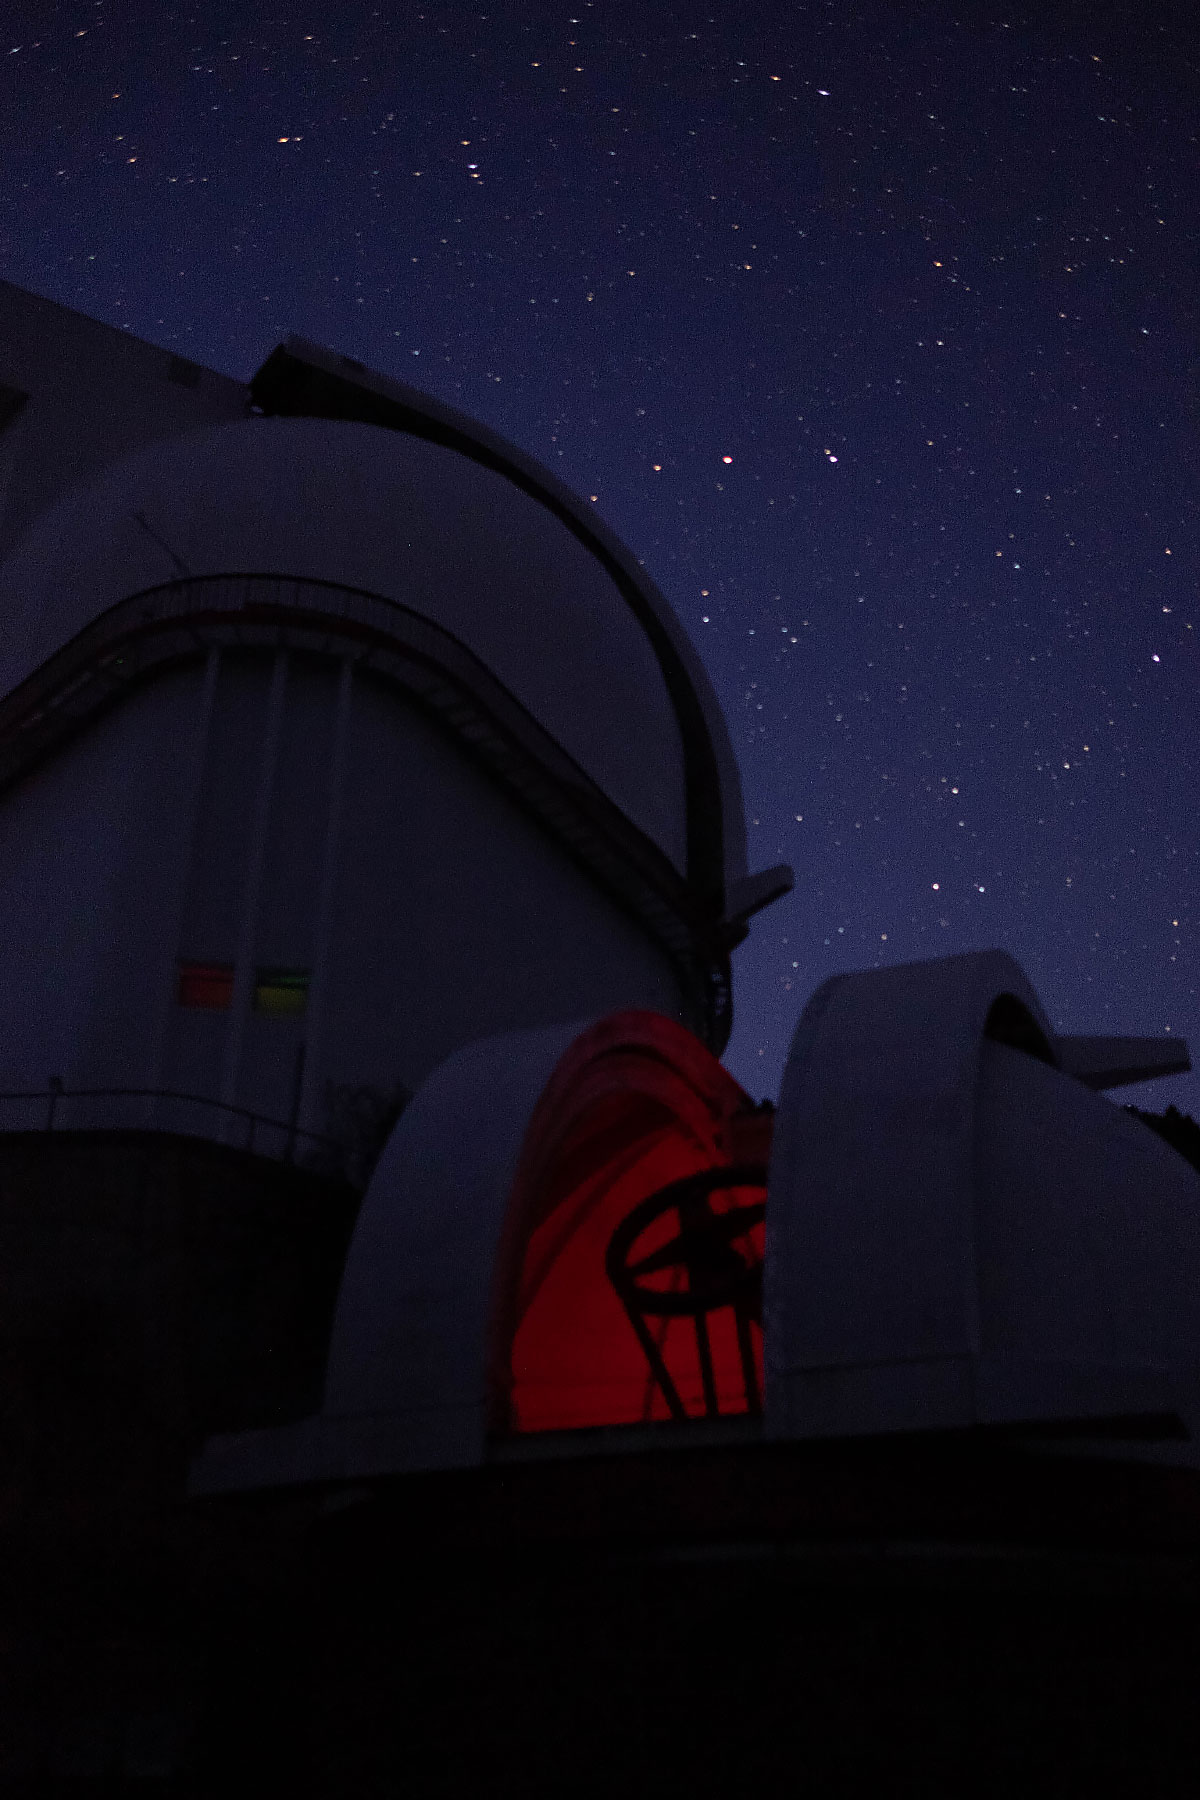 A picture of a telescope at work, at night.